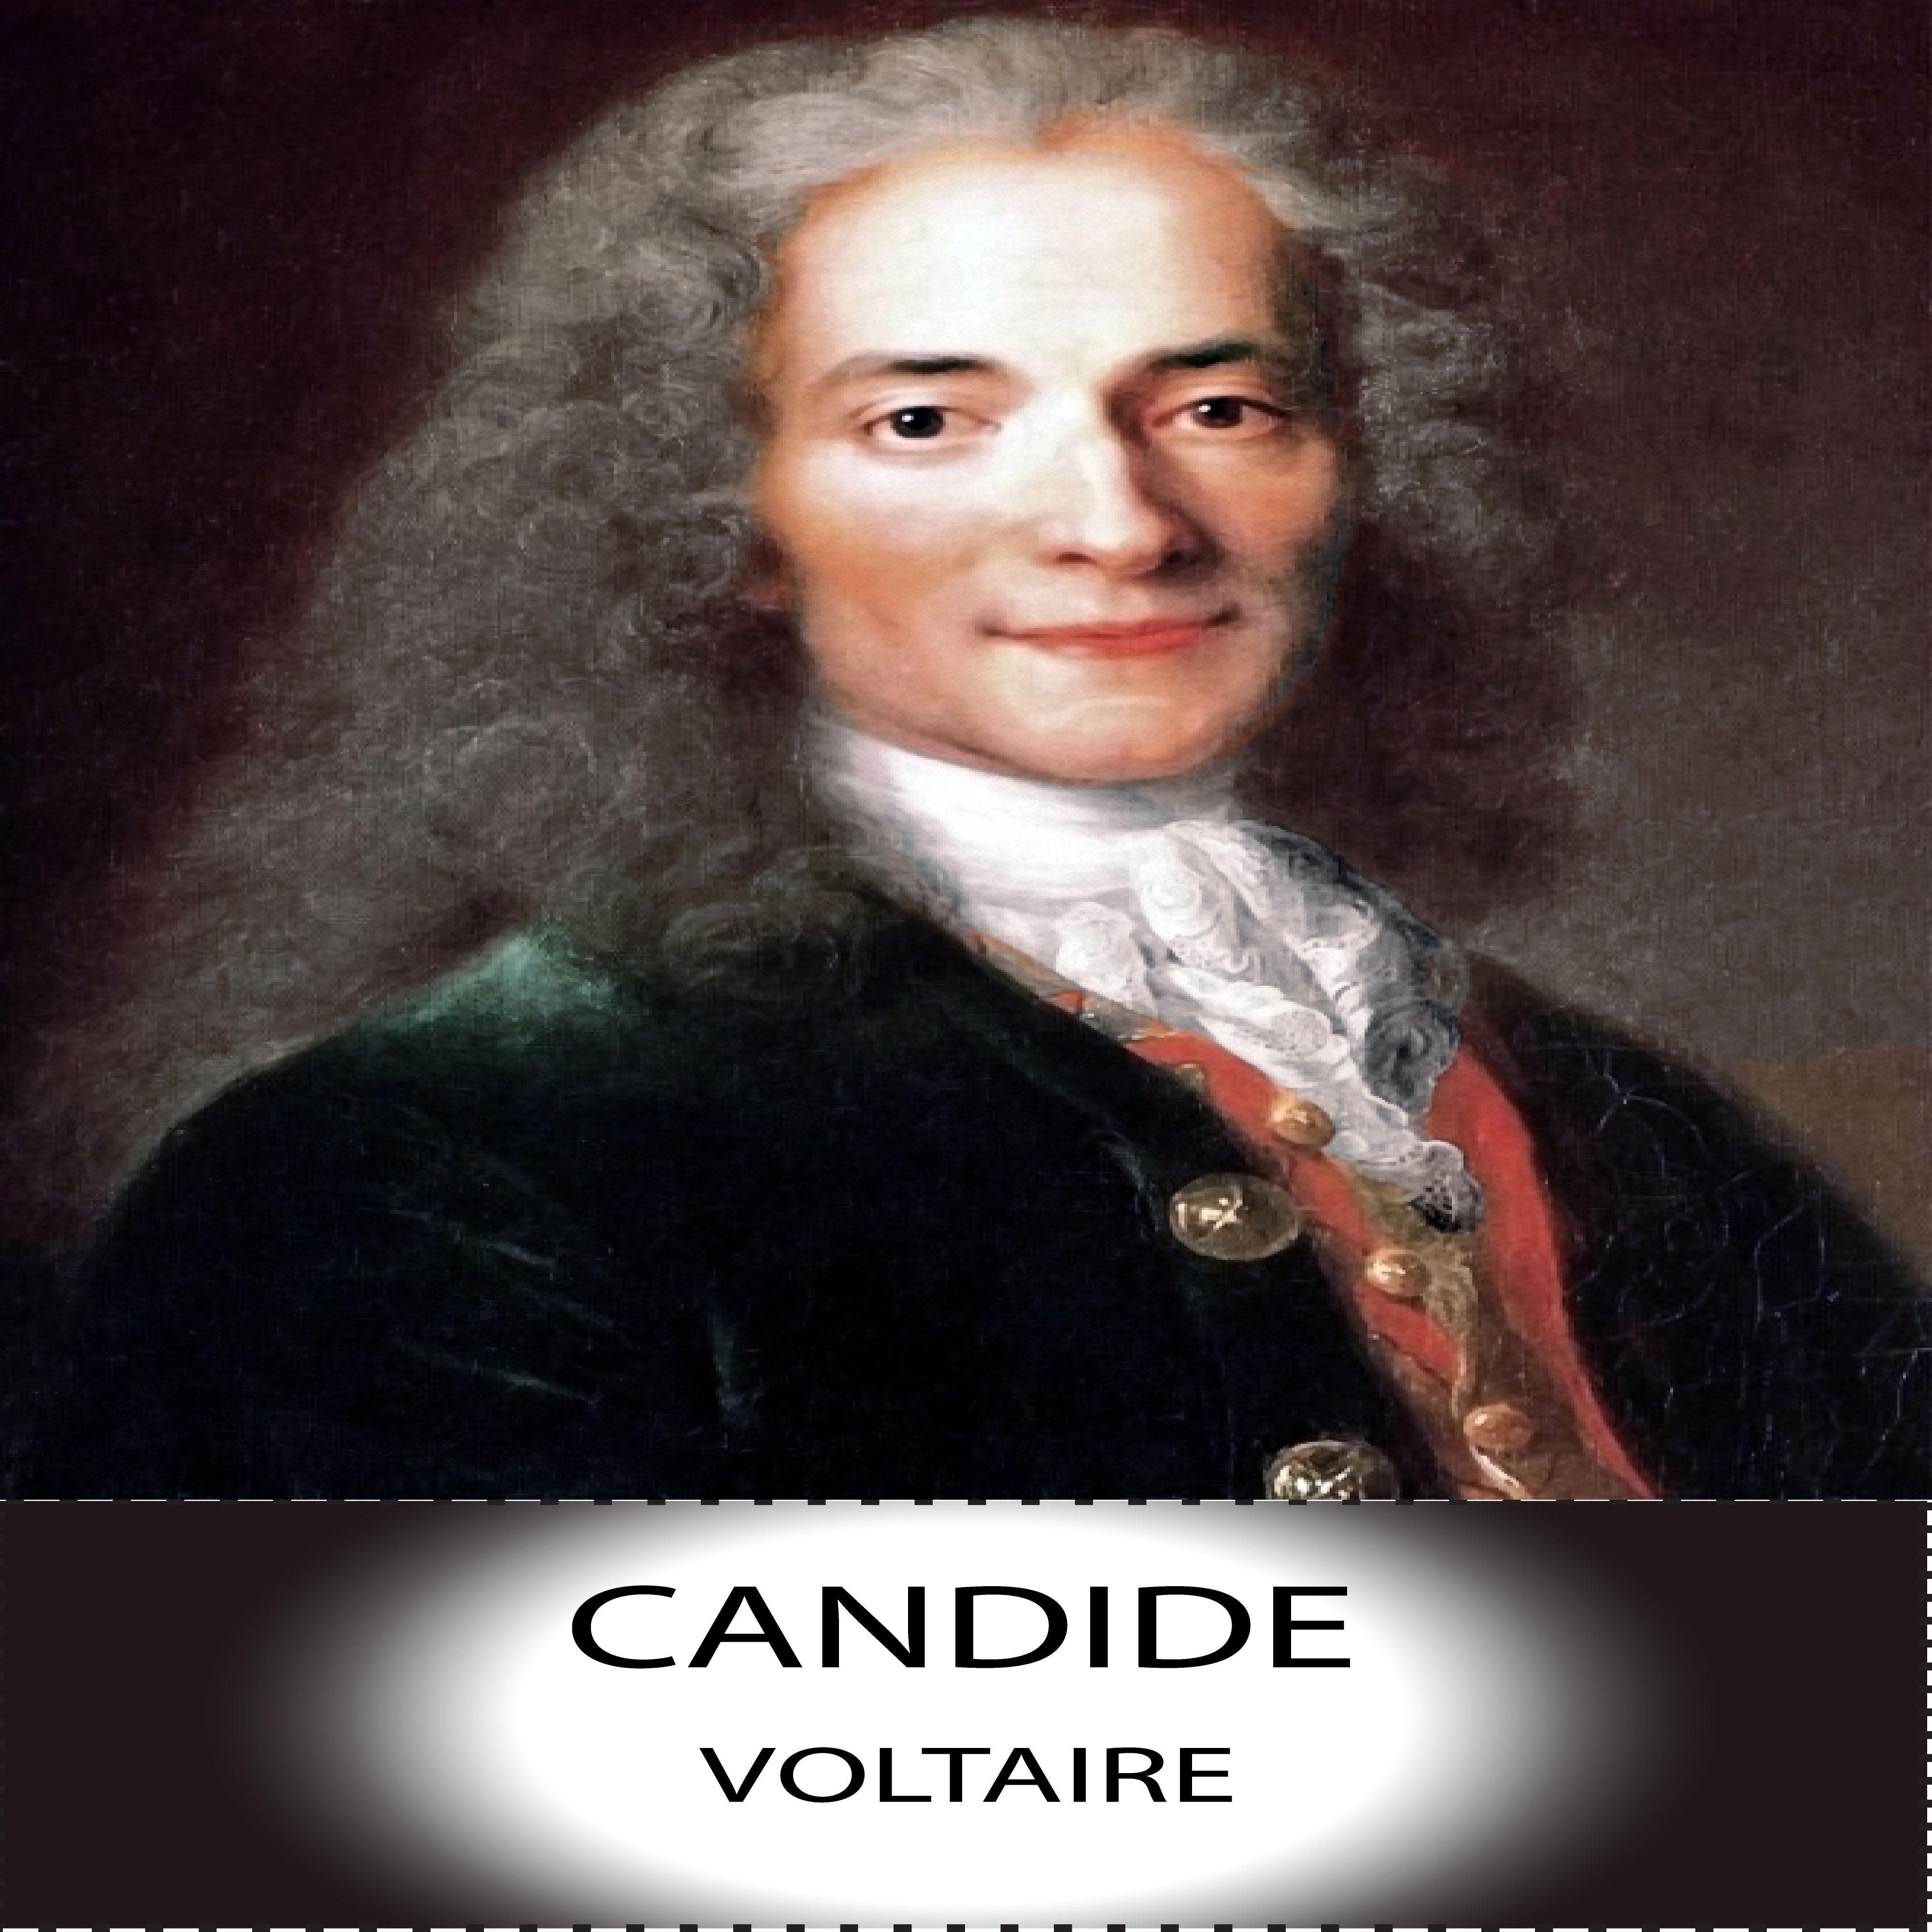 Voltaire: Candide, Chapter 10